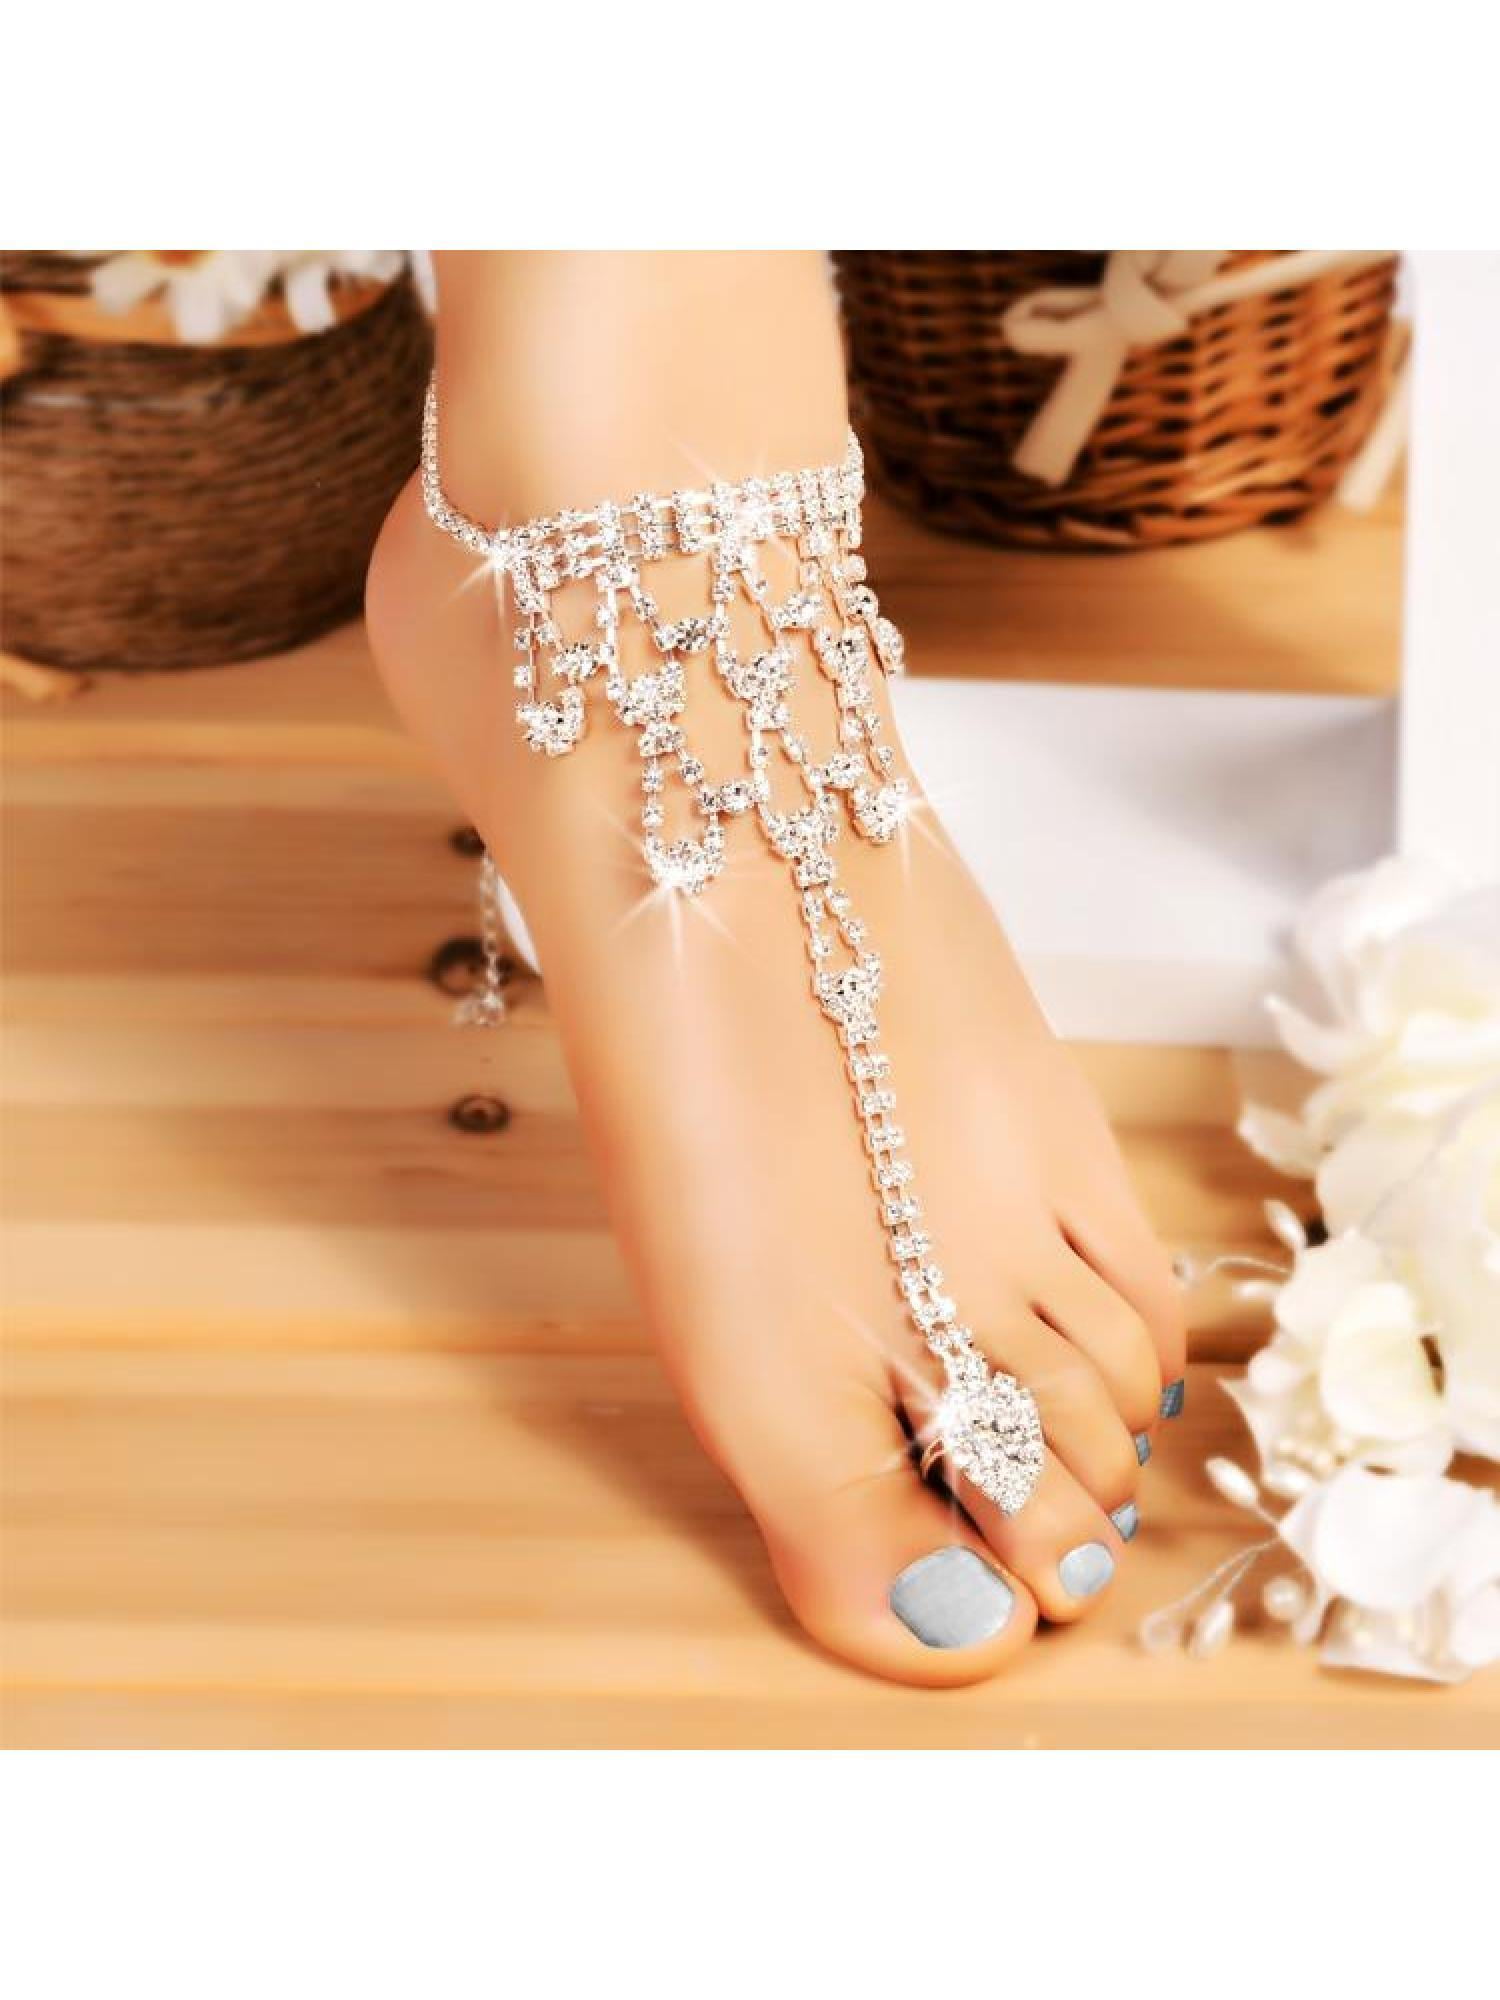 Bead Ankle Chain Bracelet Beach Wedding Foot Jewelry Barefoot Anklet Accessory W 